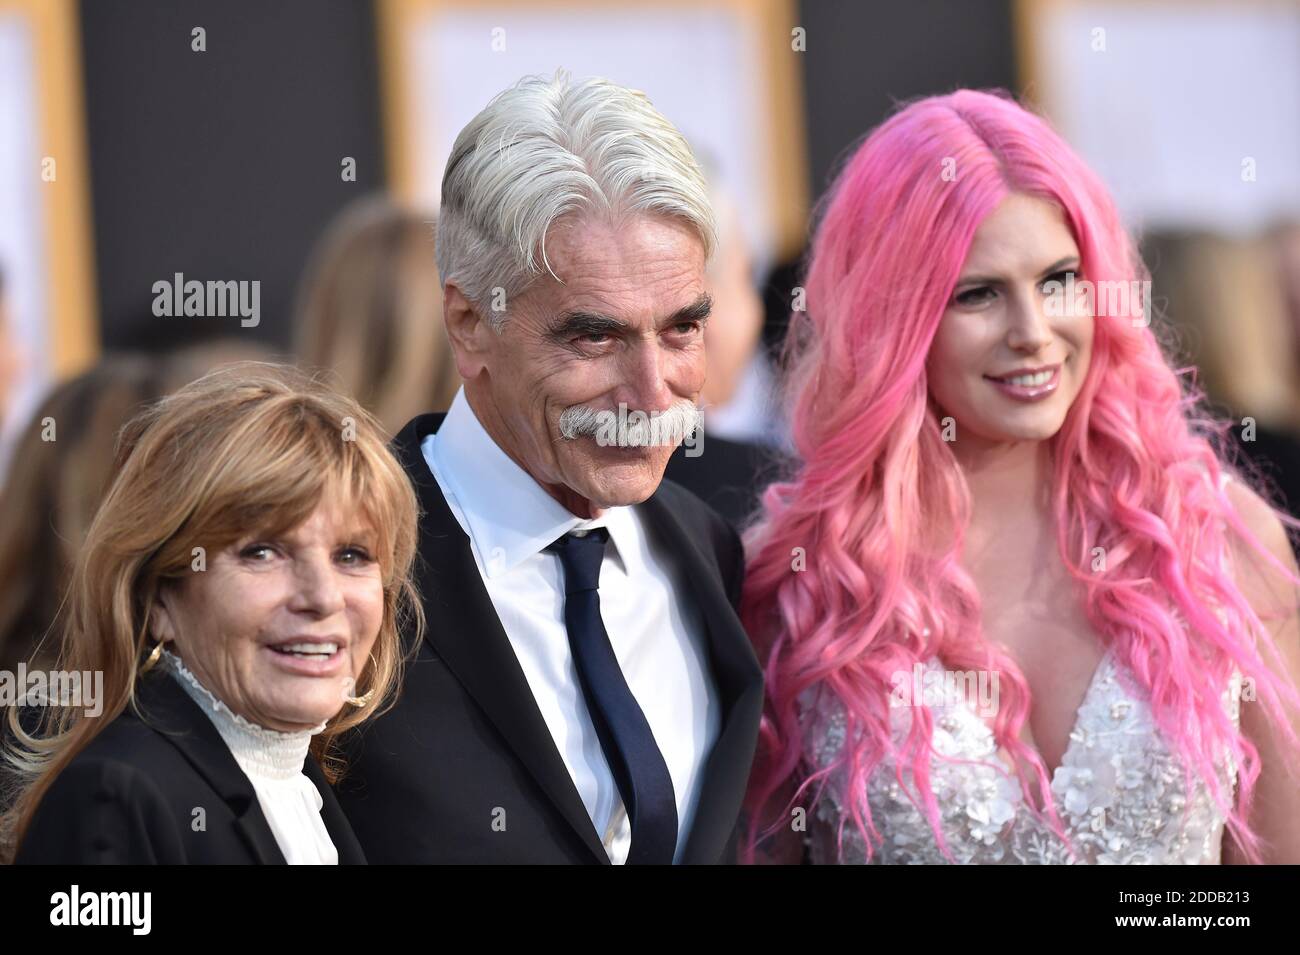 Sam Elliott, Katharine Ross, Cleo Rose Elliott attend the Premiere of  Warner Bros. Pictures' 'A Star Is Born' at the Shrine Auditorium on  September 24, 2018 in Los Angeles, California. Photo by